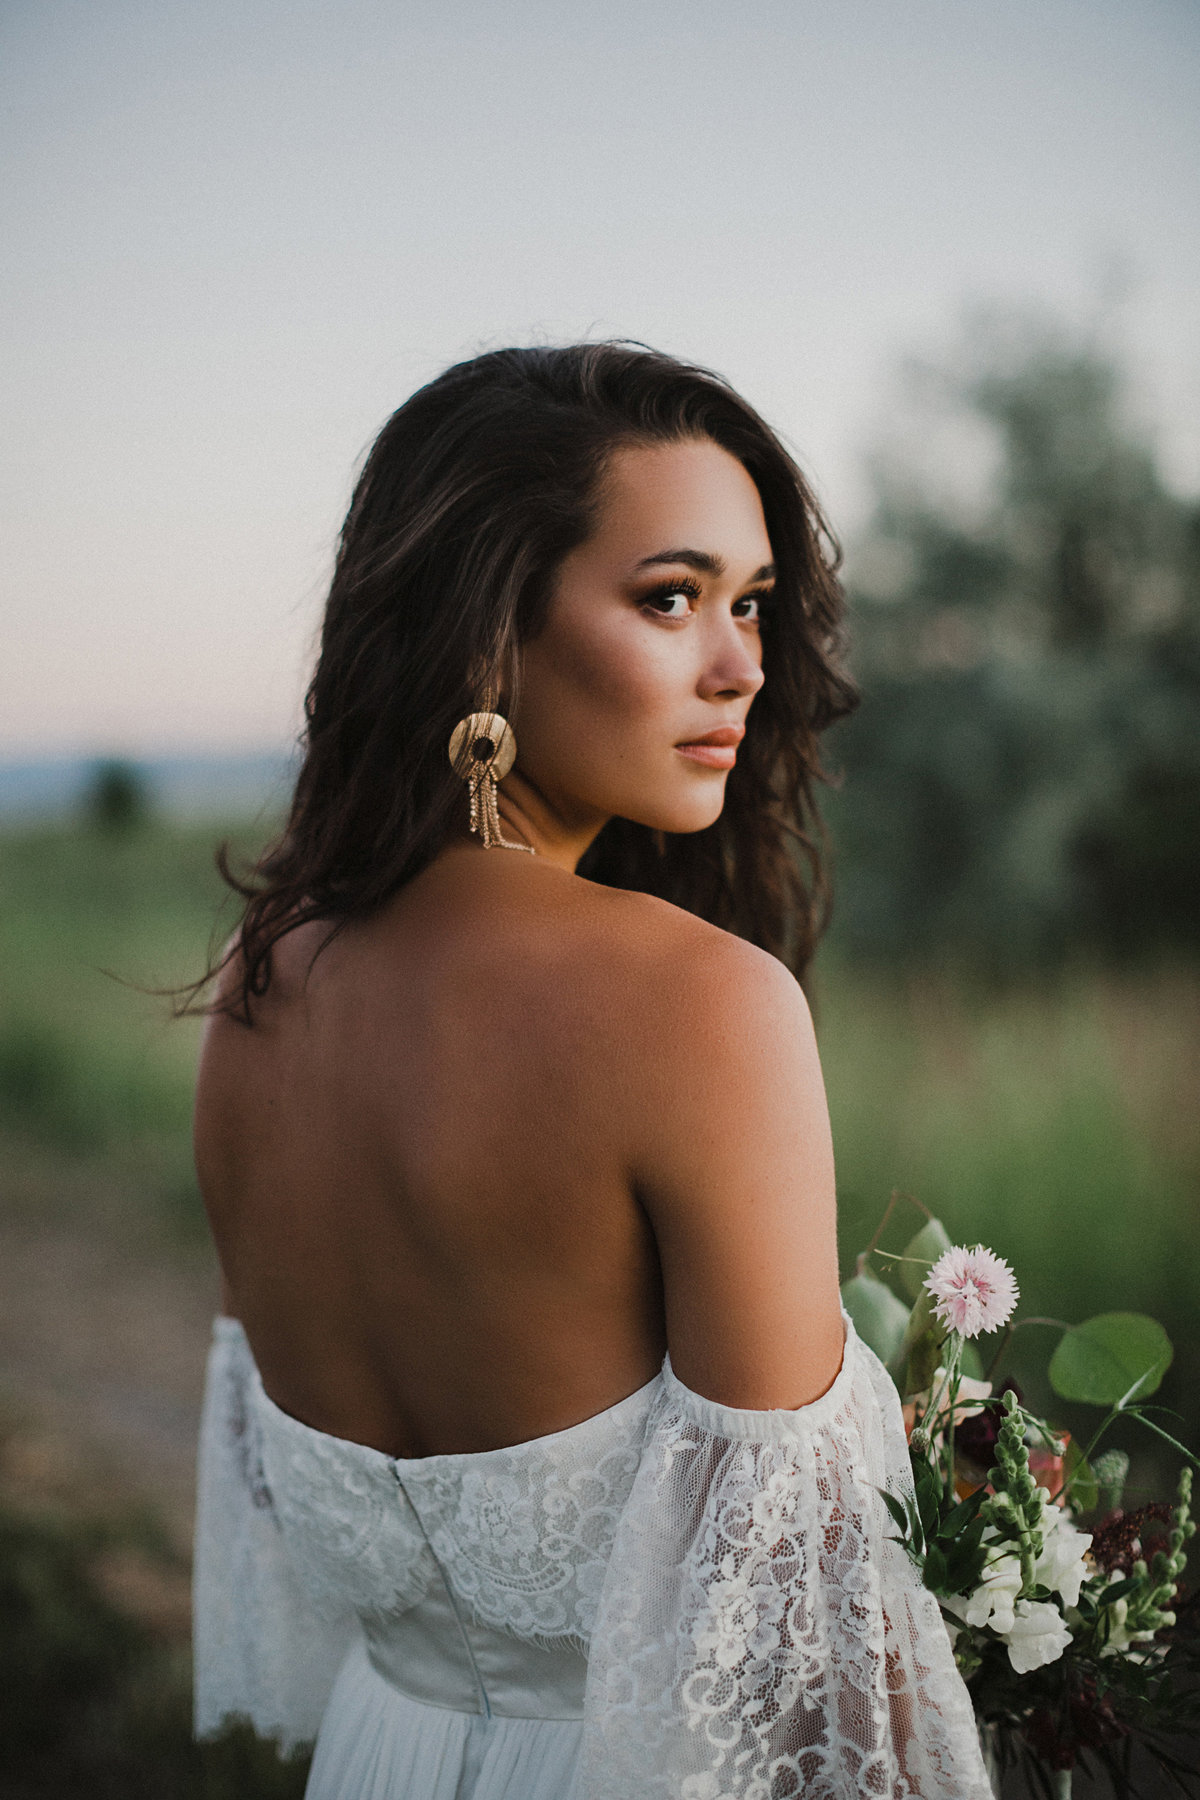 Boho styled wedding shoot in collaboration with Velvet Bride in Missoula, Montana.